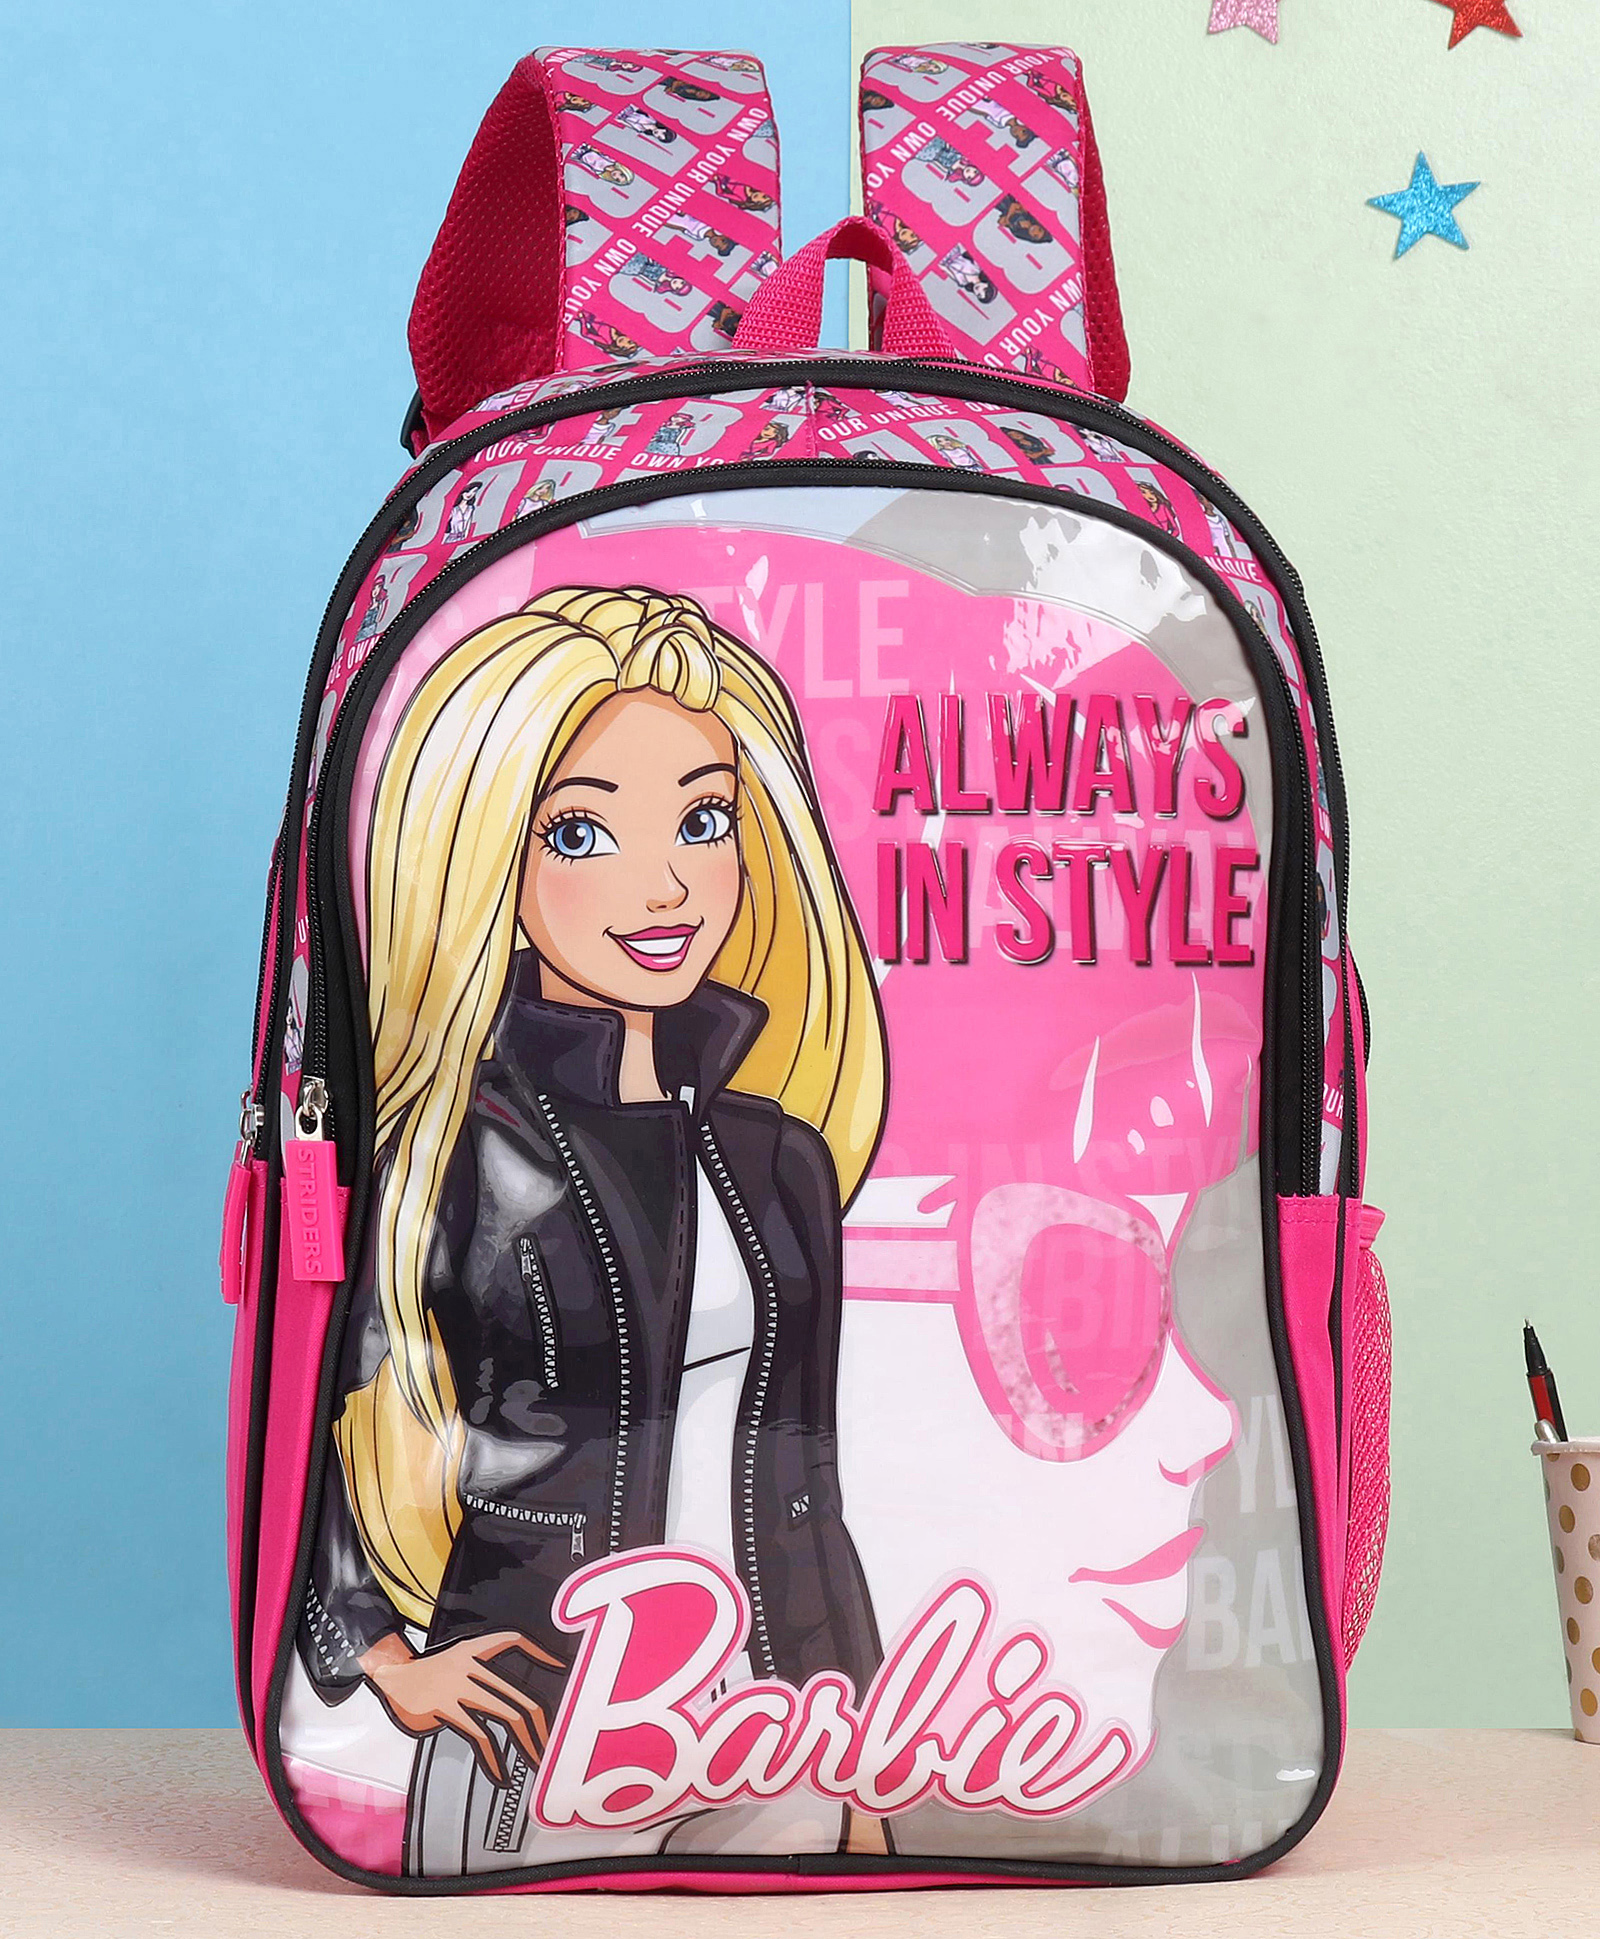 Share more than 84 school bag style - in.duhocakina